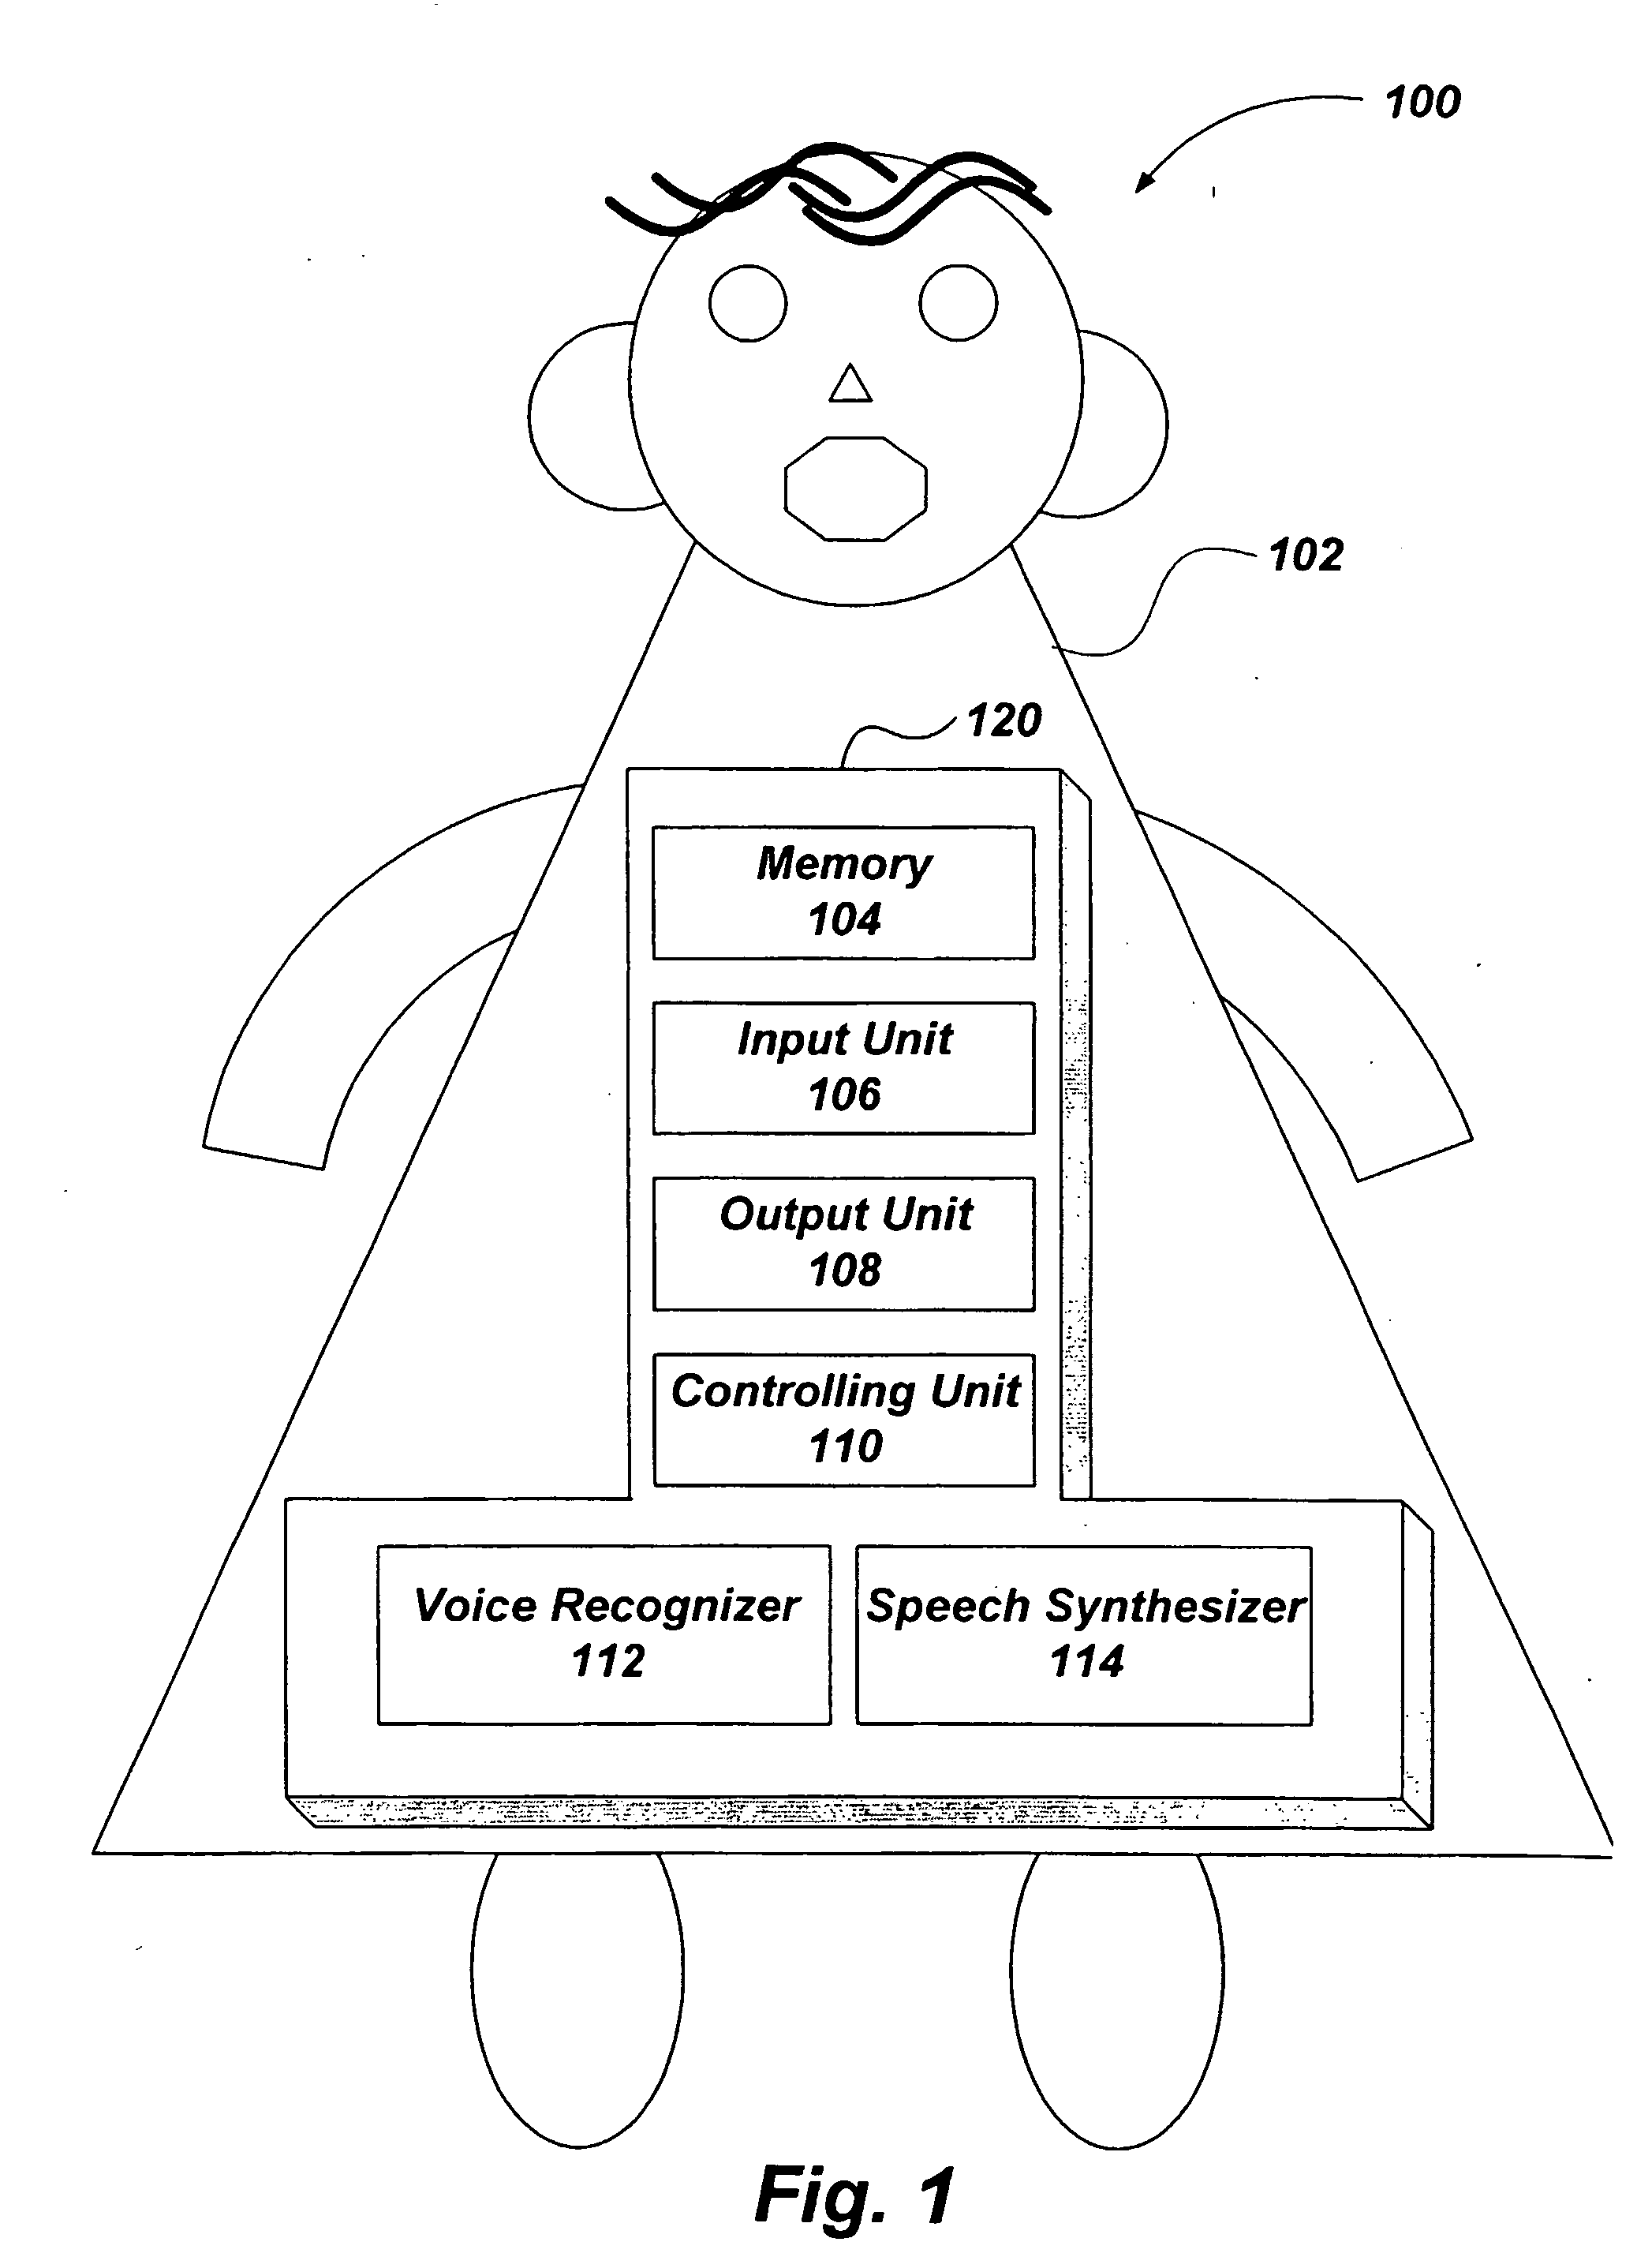 Method and apparatus of simulating and stimulating human speech and teaching humans how to talk